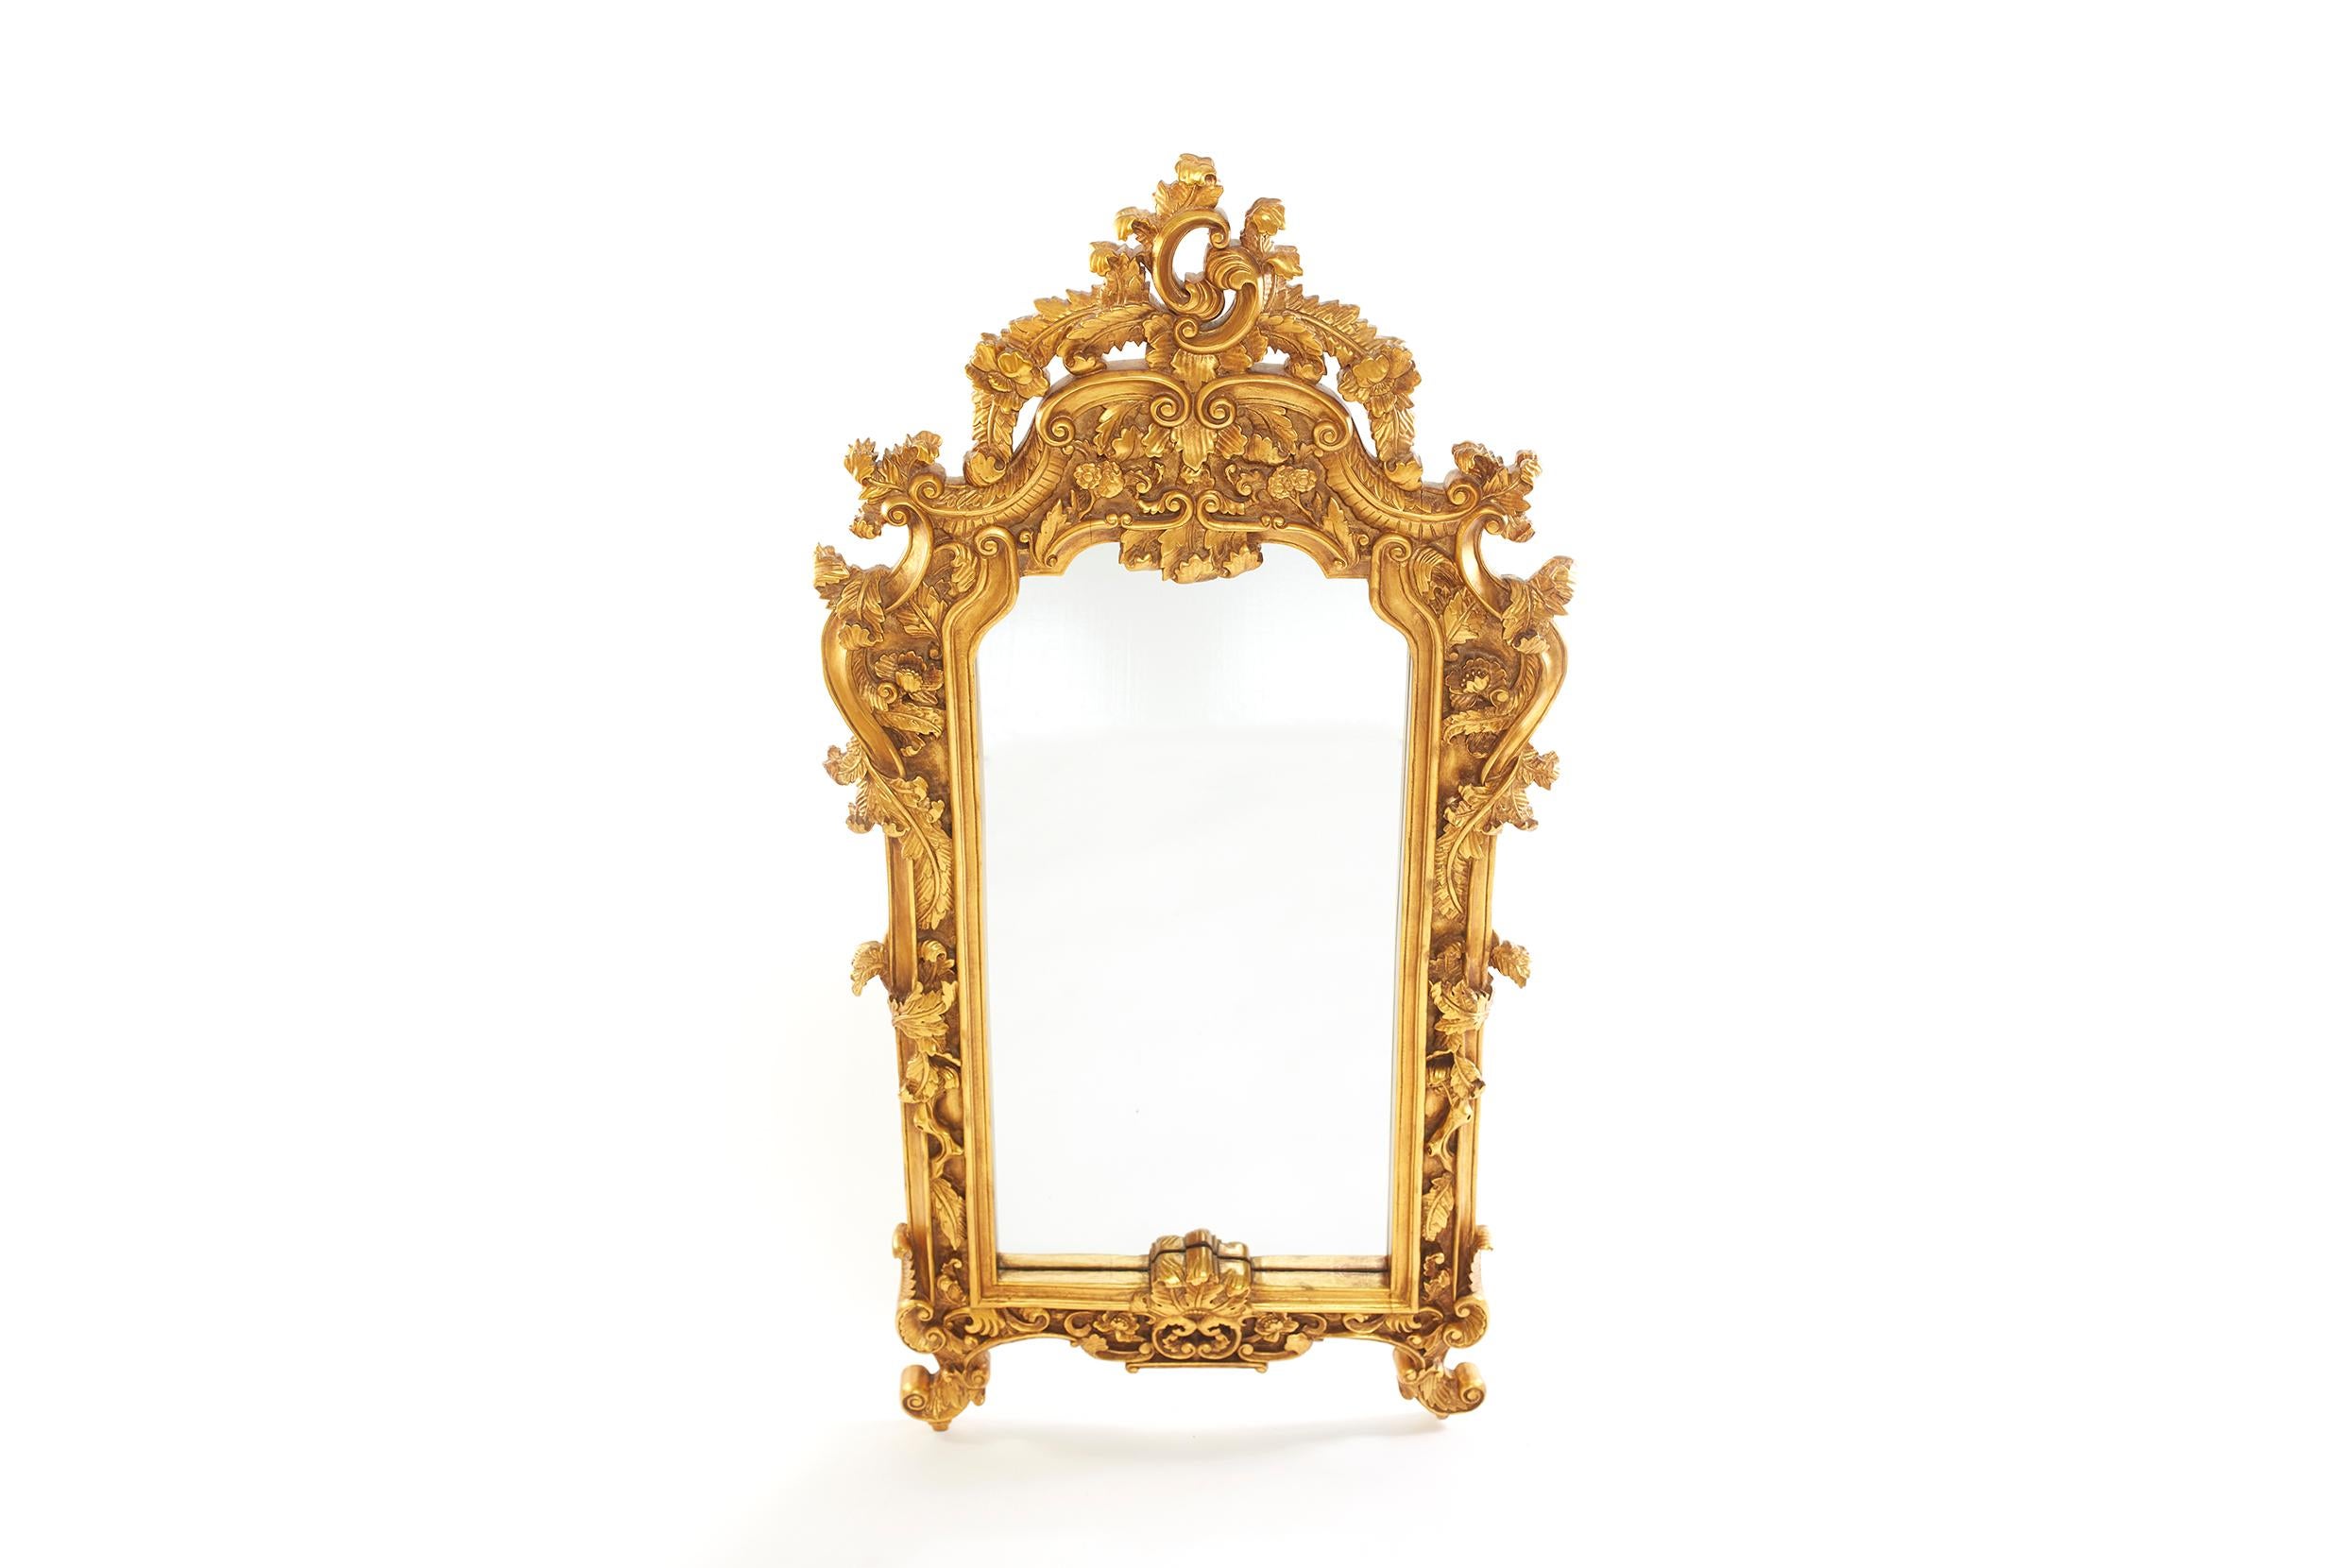 Ornately gilt wood framed pair beveled hanging wall mirror with hand carved design details motif. The mirror is in good condition. Minor wear consistent with age / use. The gilt wood frame measure 60 inches high x 31 inches wide x 2 inches deep. The